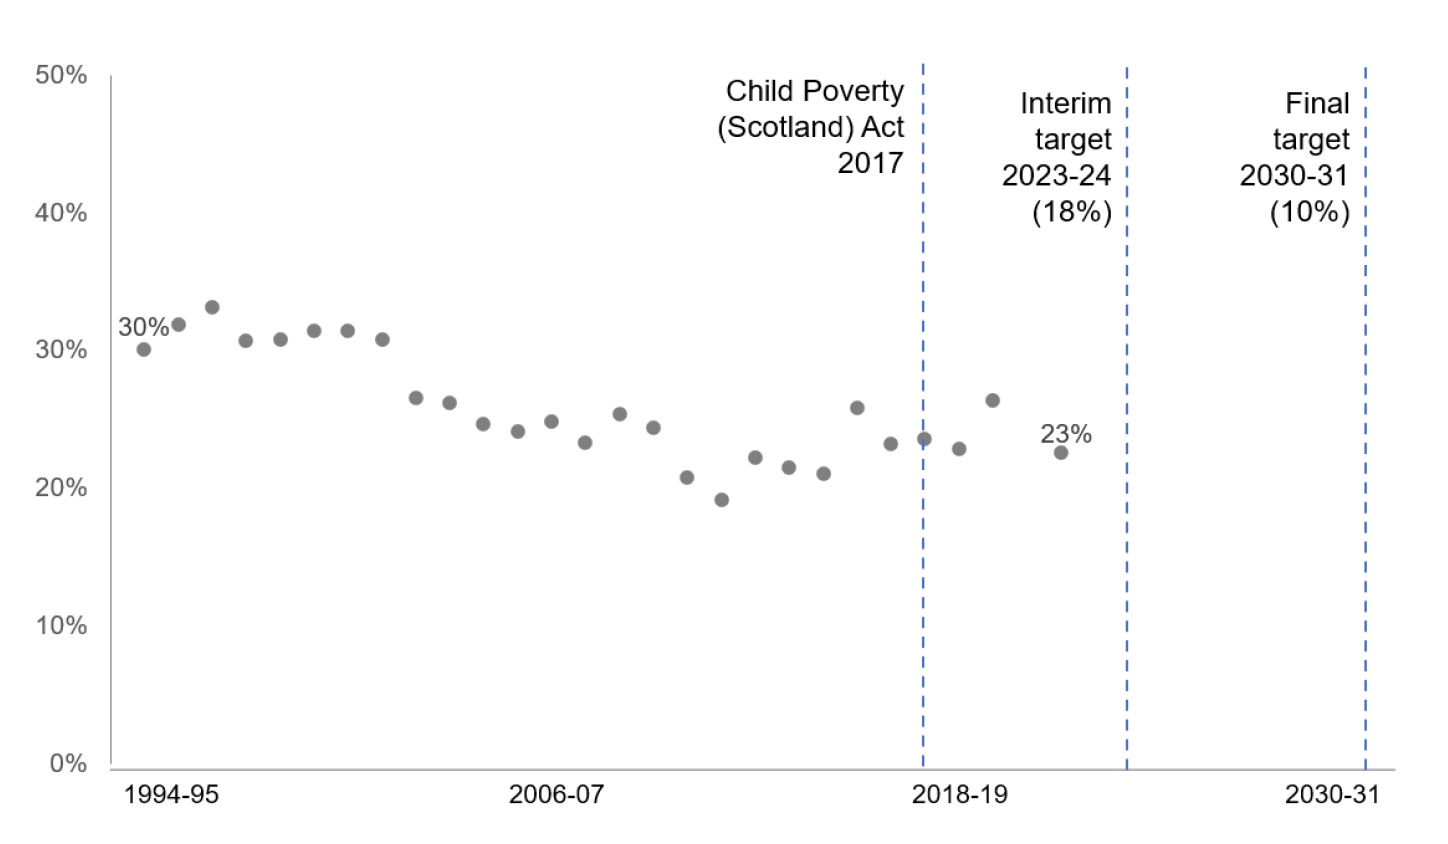 A chart displaying the trend data
(1994/95-2021/22) for the percentage of children in relative poverty after
housing costs.